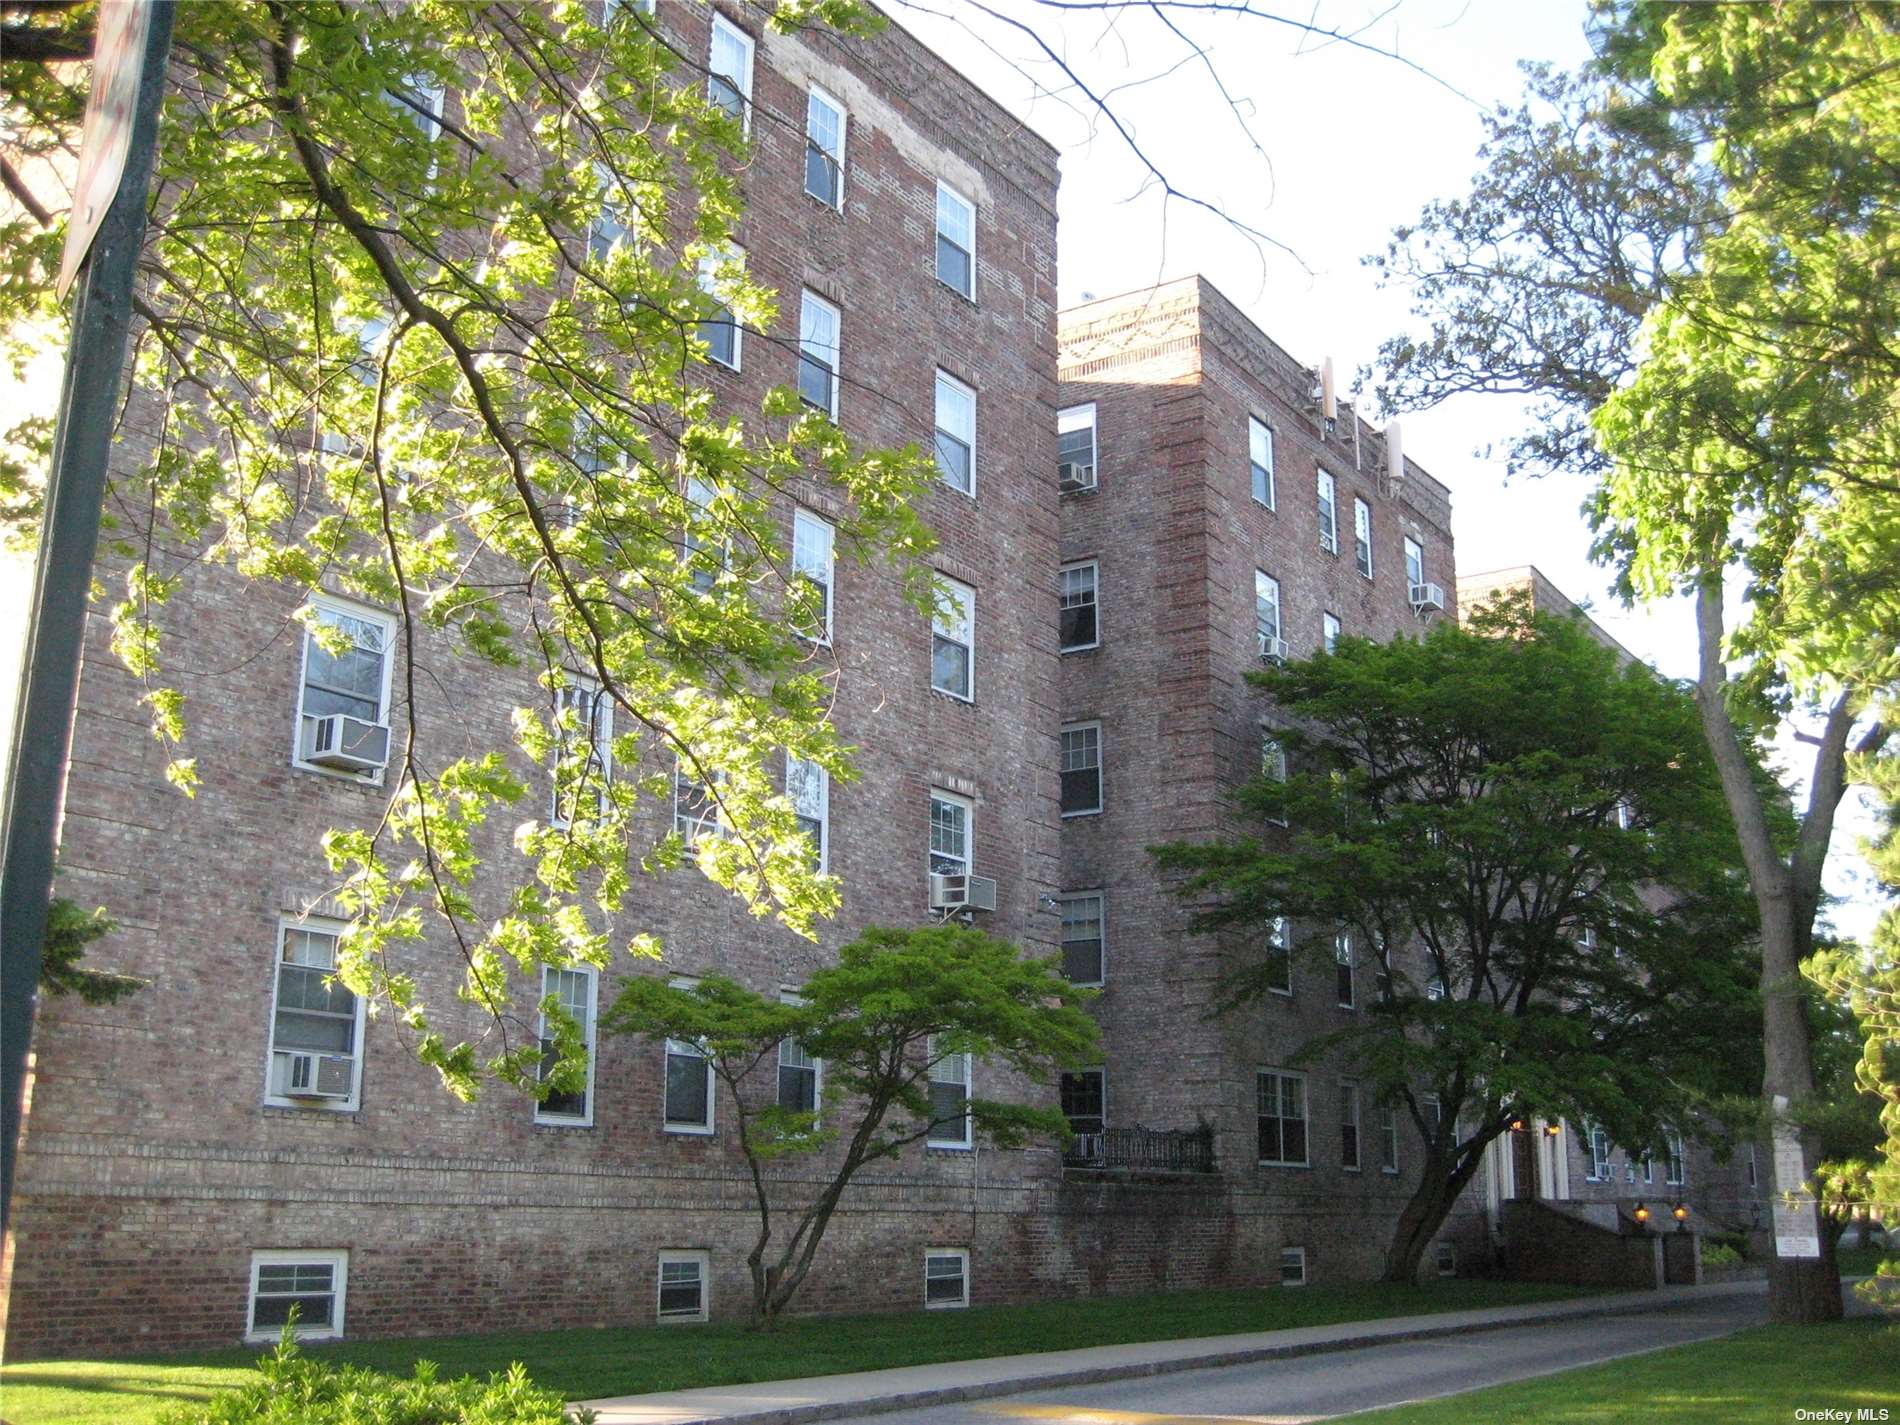 a front view of a multi story residential apartment buildings